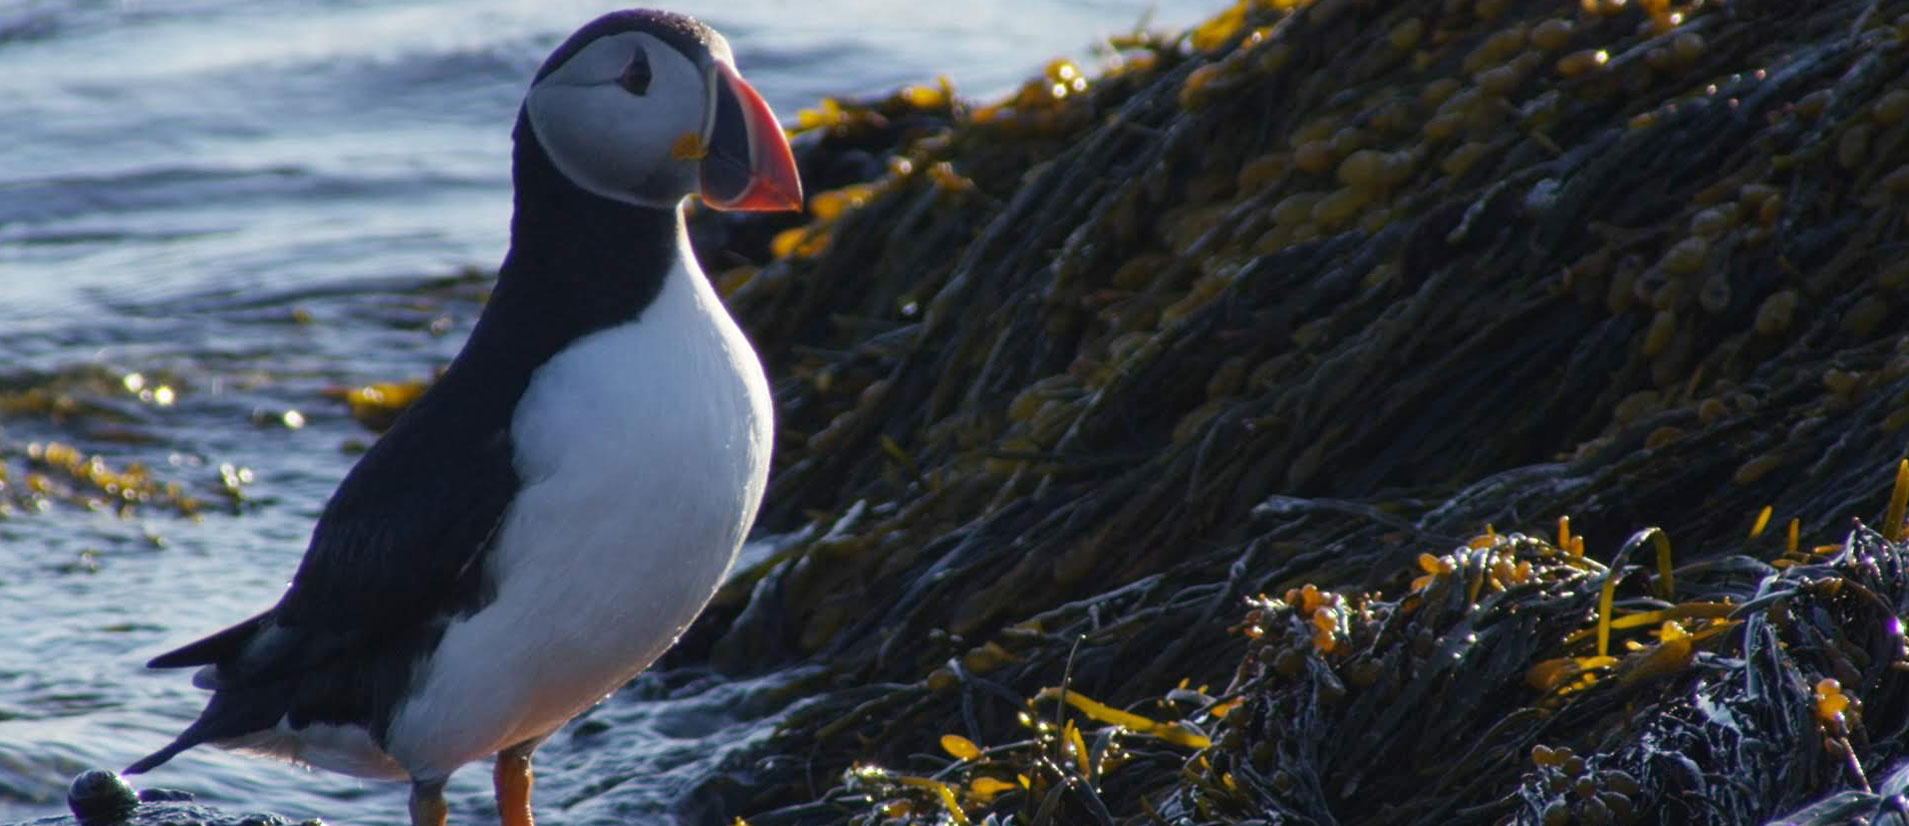 10 Facts About Puffins